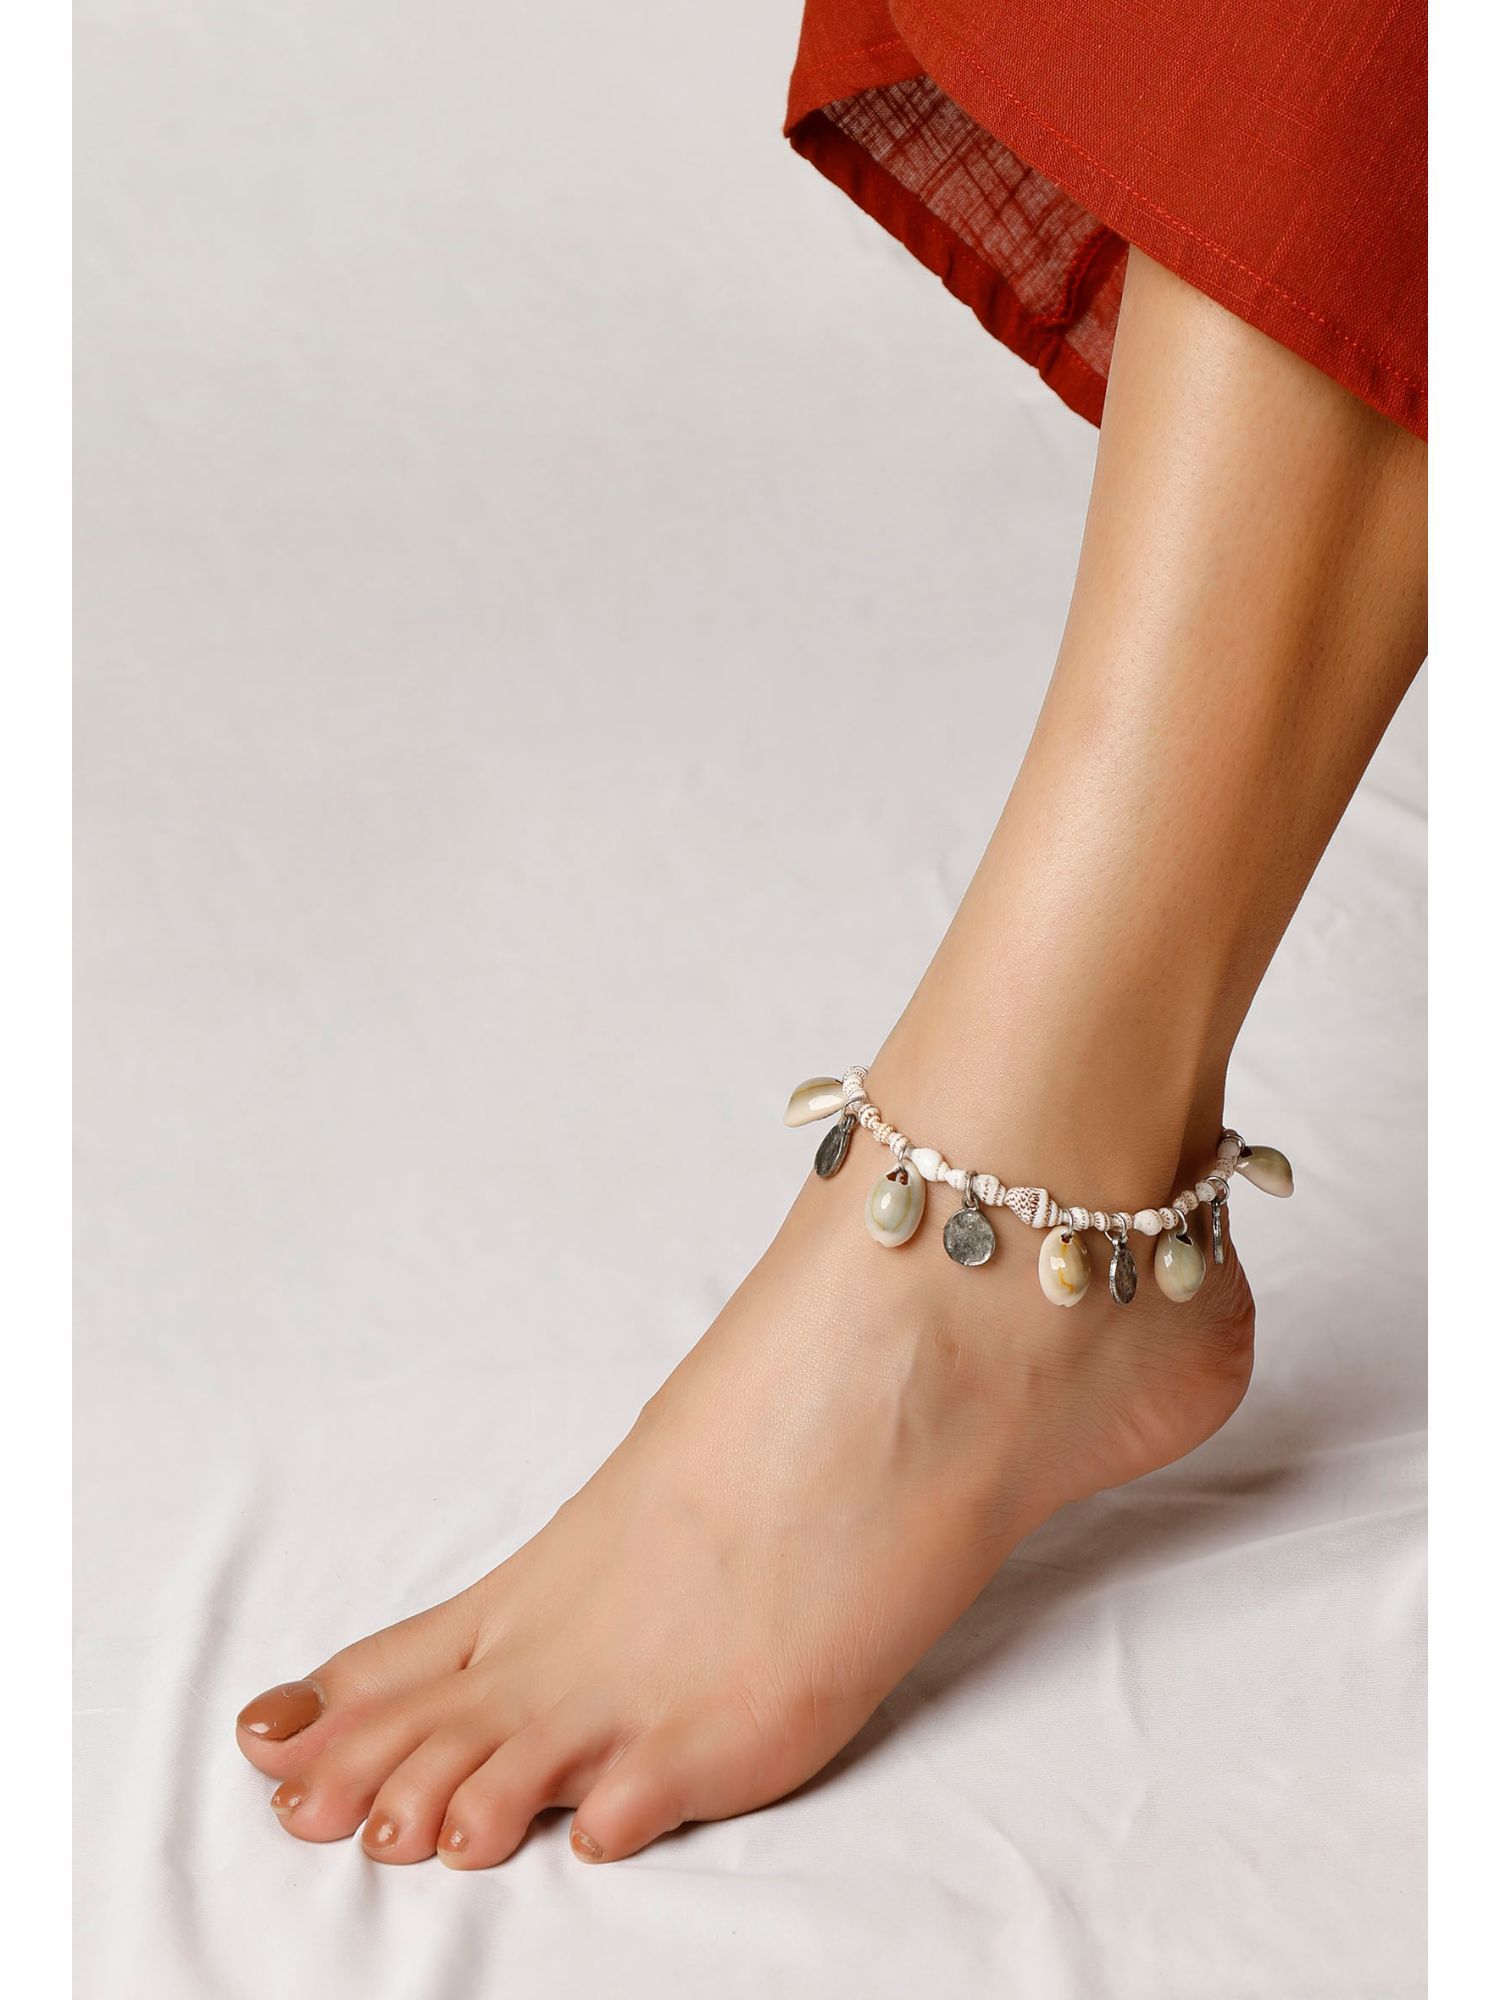 best place to buy anklets